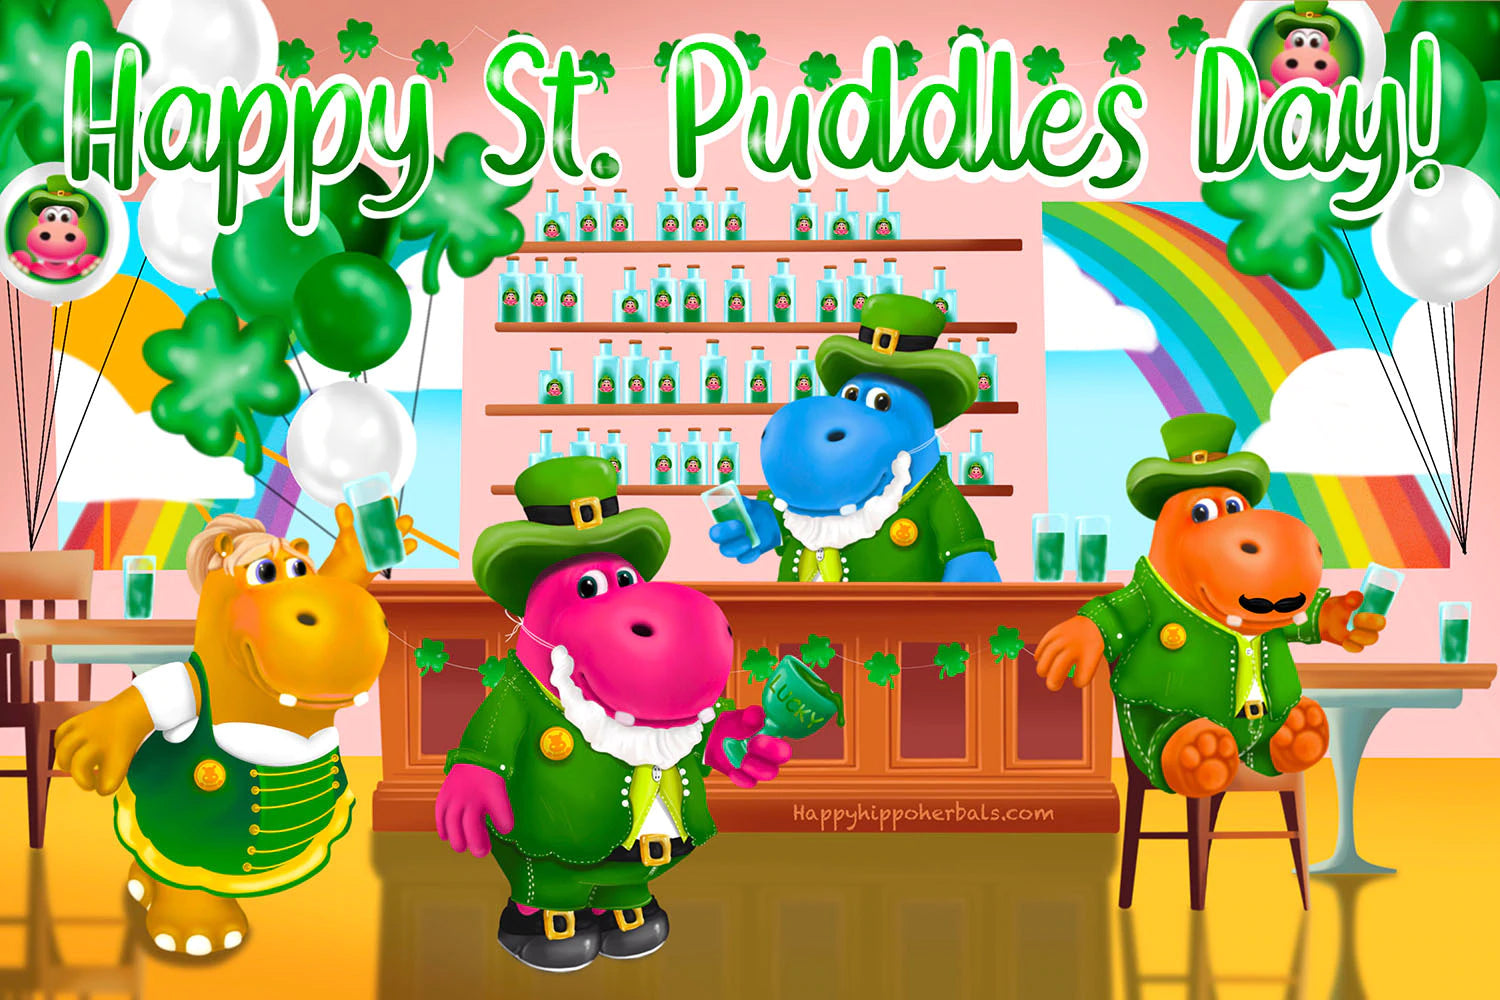 Graphic Designed image depicting Puddles and Bubbles the Hippo characters celebrating St. Patrick's Day with a few hippo friends at an Irish pub! Everyone is enjoying a glass of Happy Hippo brand kratom tea